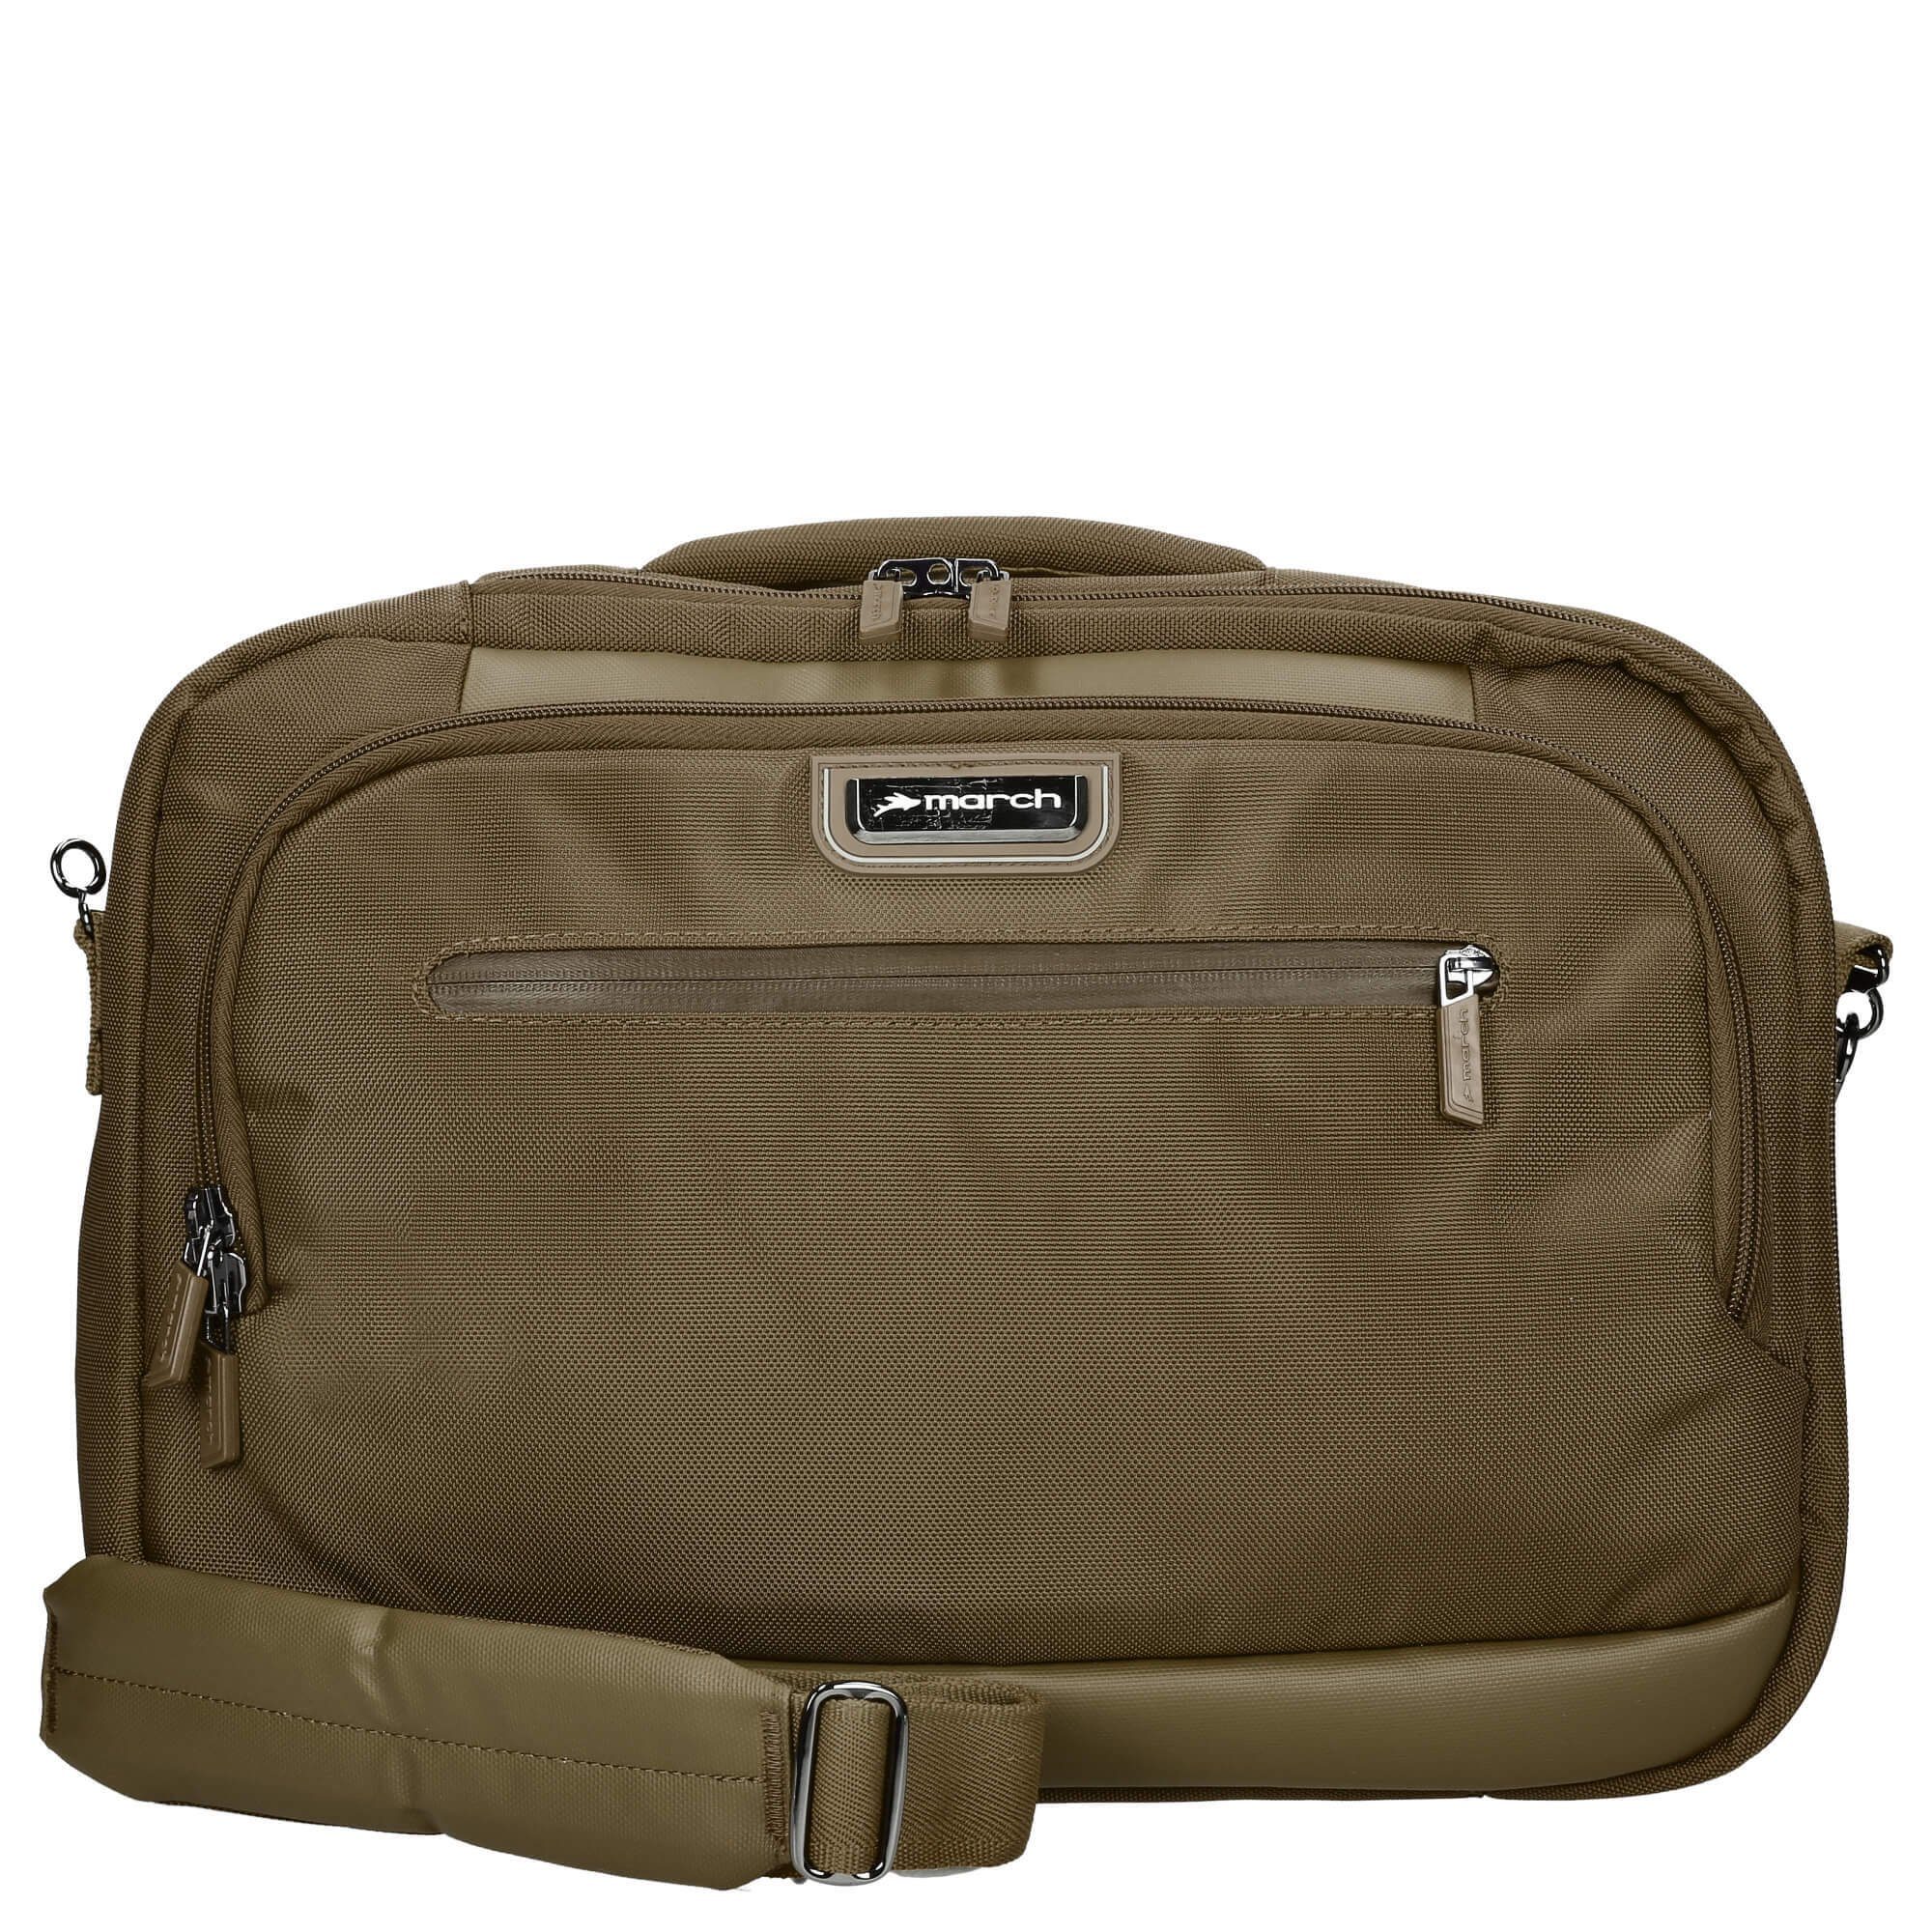 March15 Trading Businesstasche Rolling Bags take Away - Laptoptasche 42 cm bronze